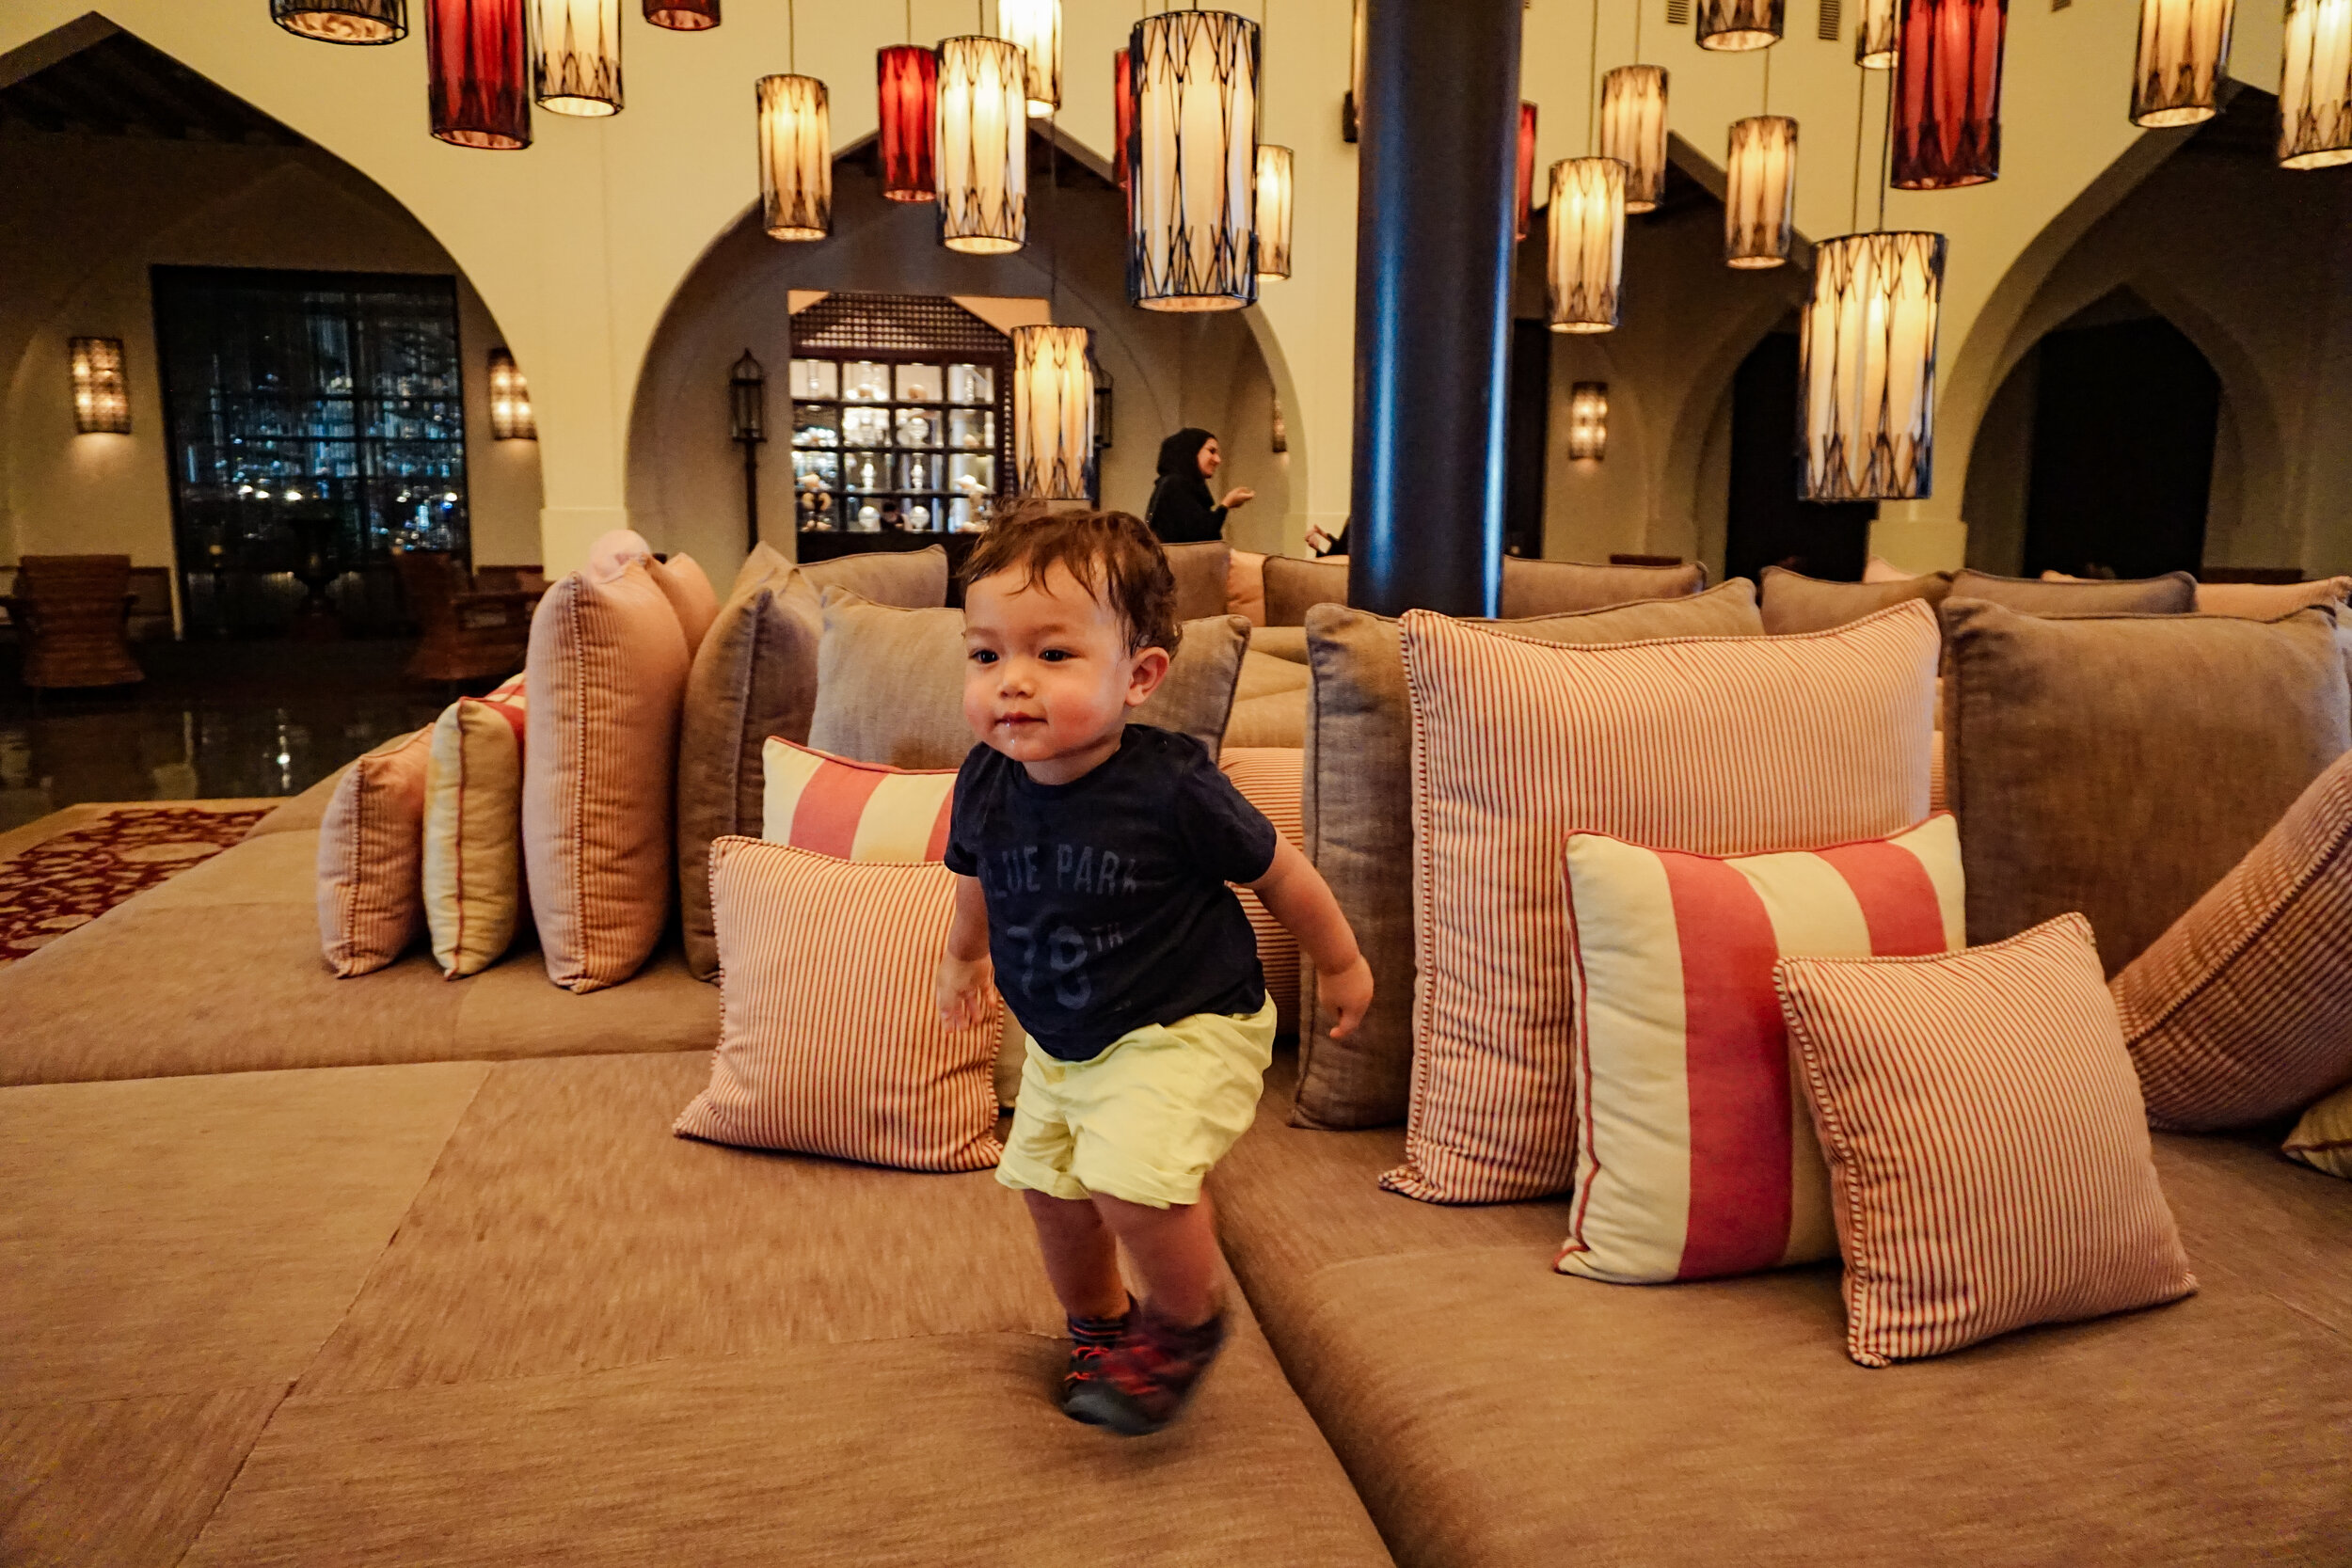 Baby-toddler-playing-couch-lobby-The-Chedi-Muscat-Oman.jpg